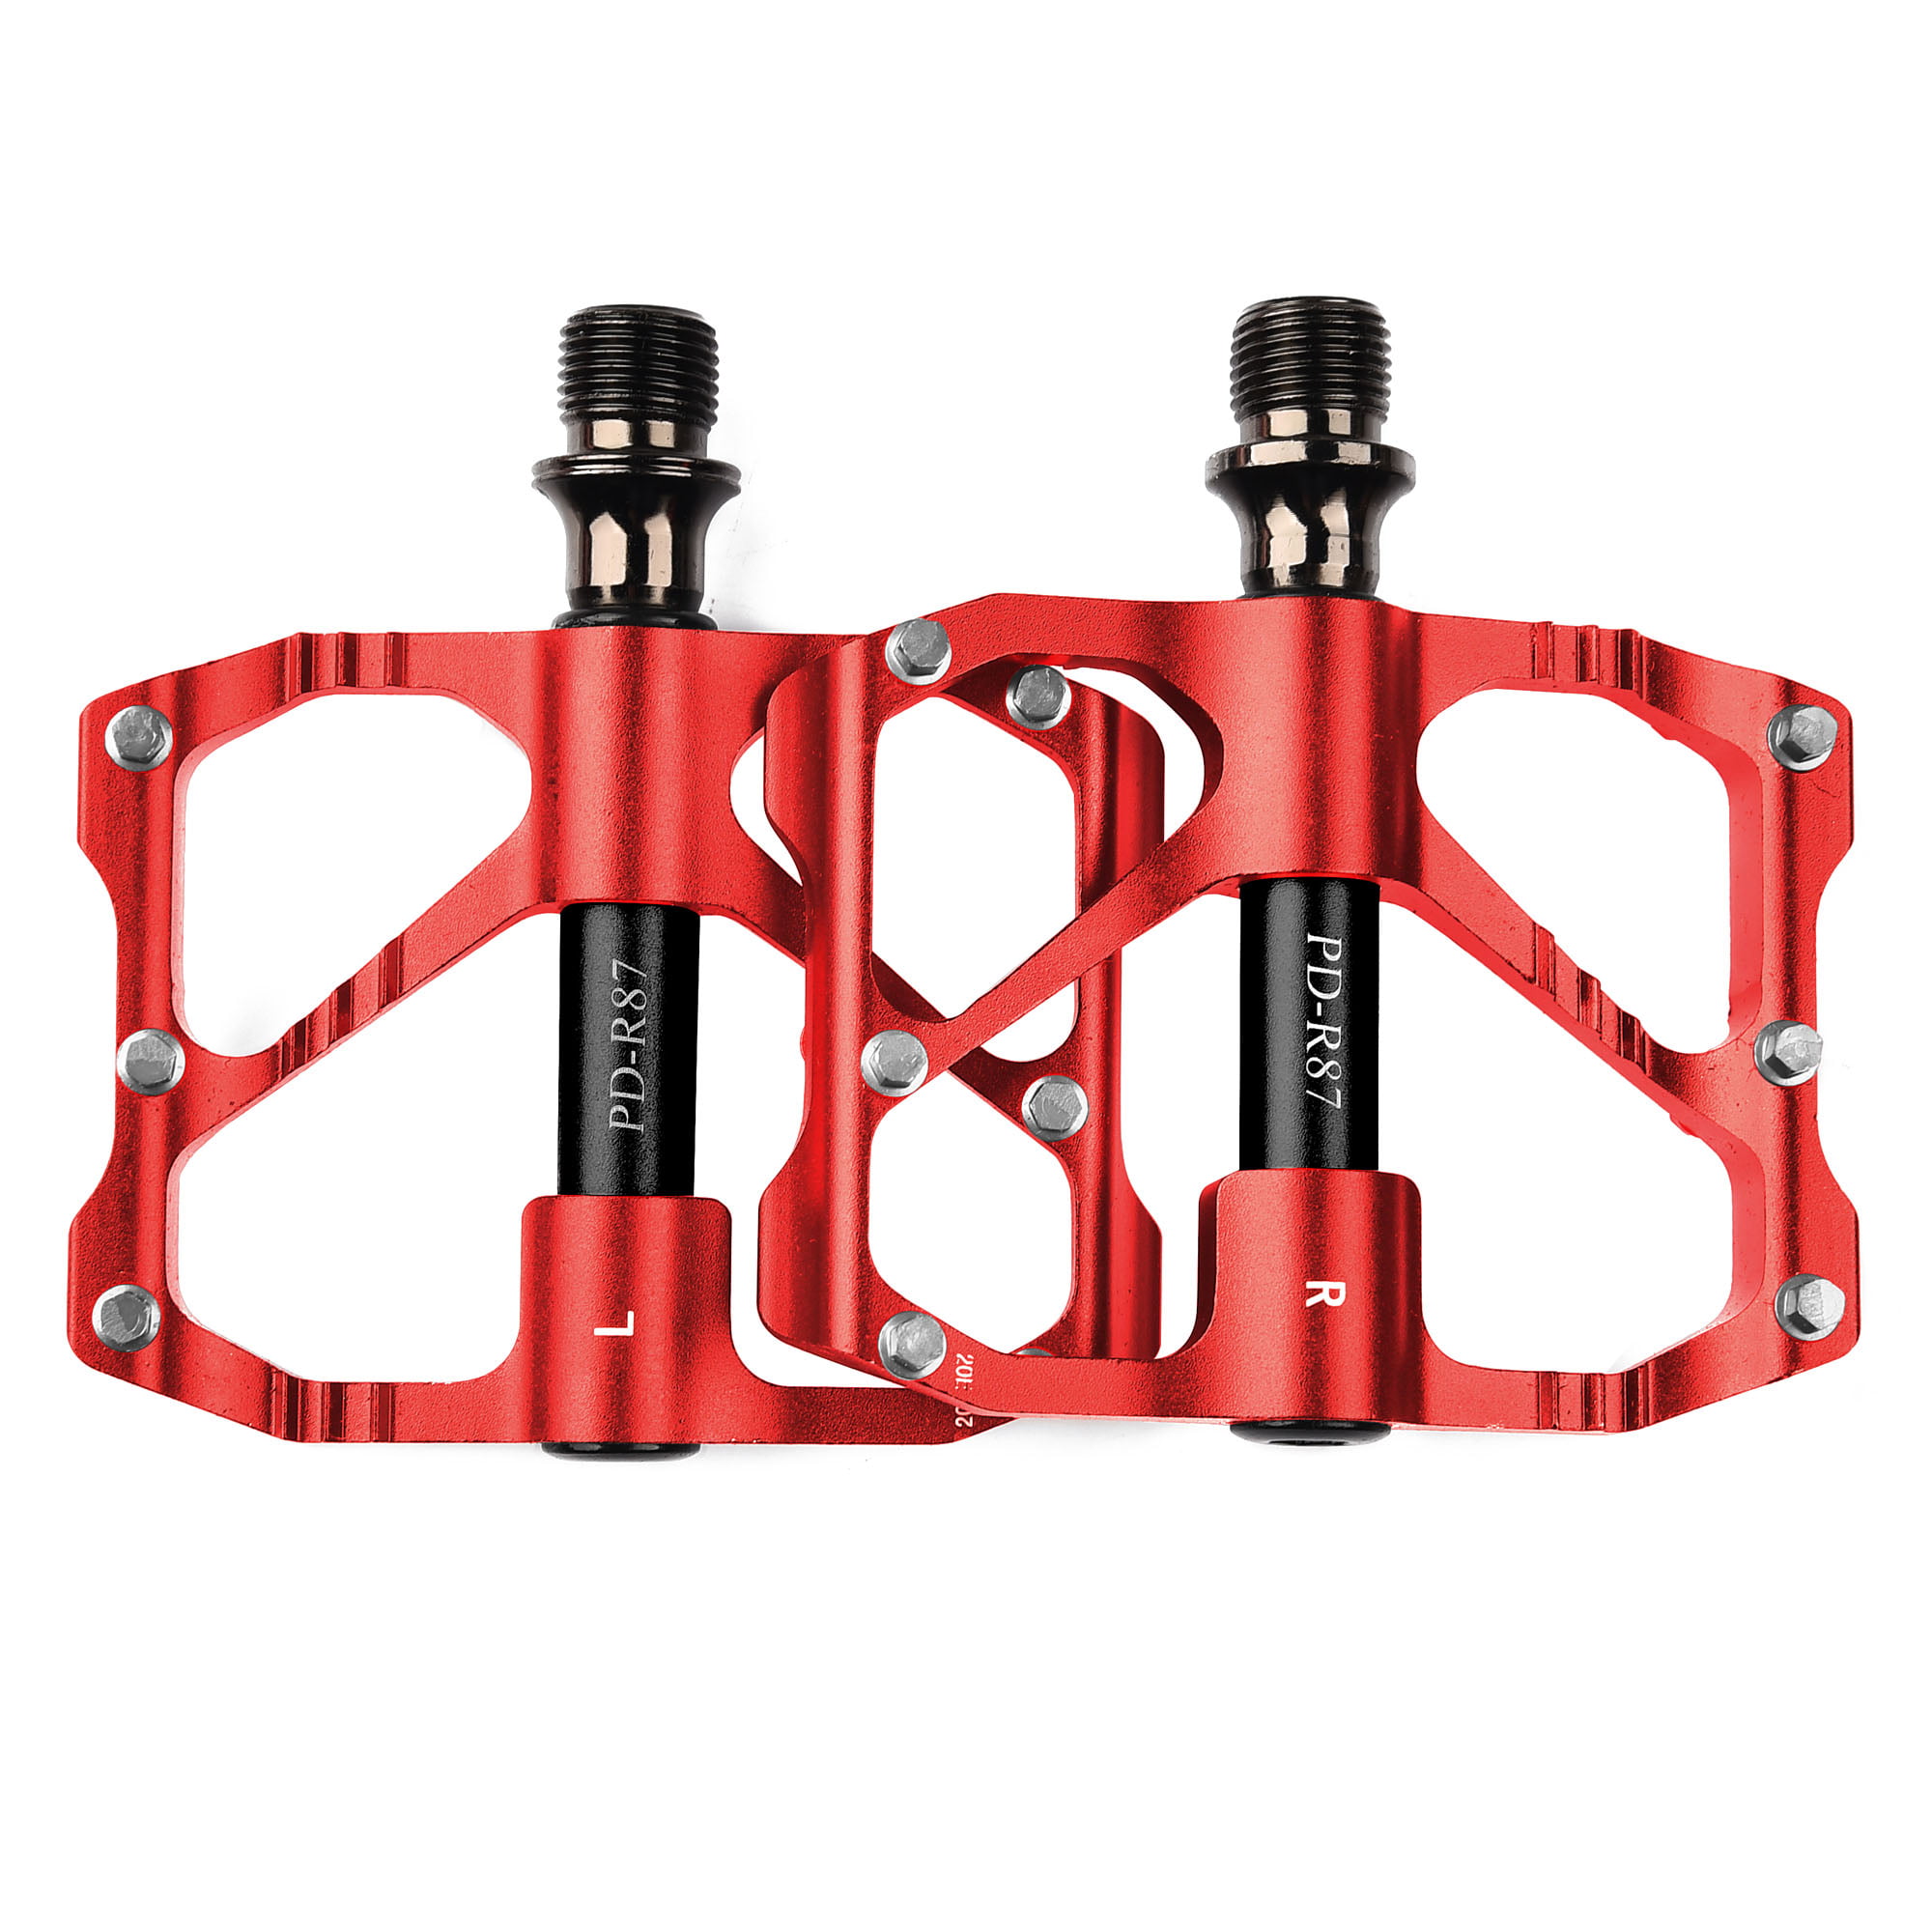 Details about   Mountain Non-Slip Bike Pedals Platform Bicycle Flat Alloy Pedals 9/16" 3 Bearing 